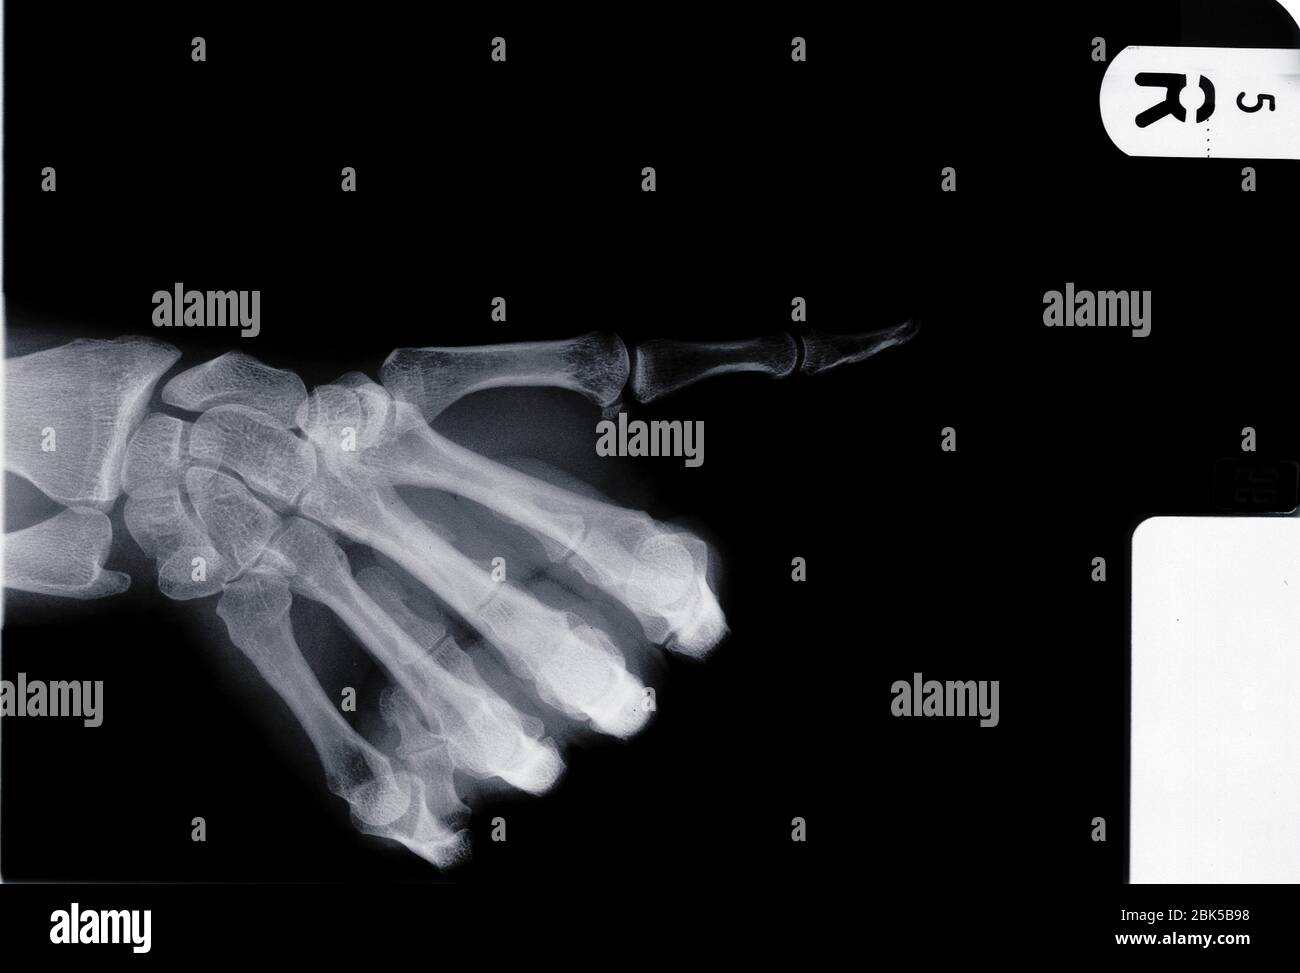 Human hand with thumb pointing, X-ray. Stock Photo